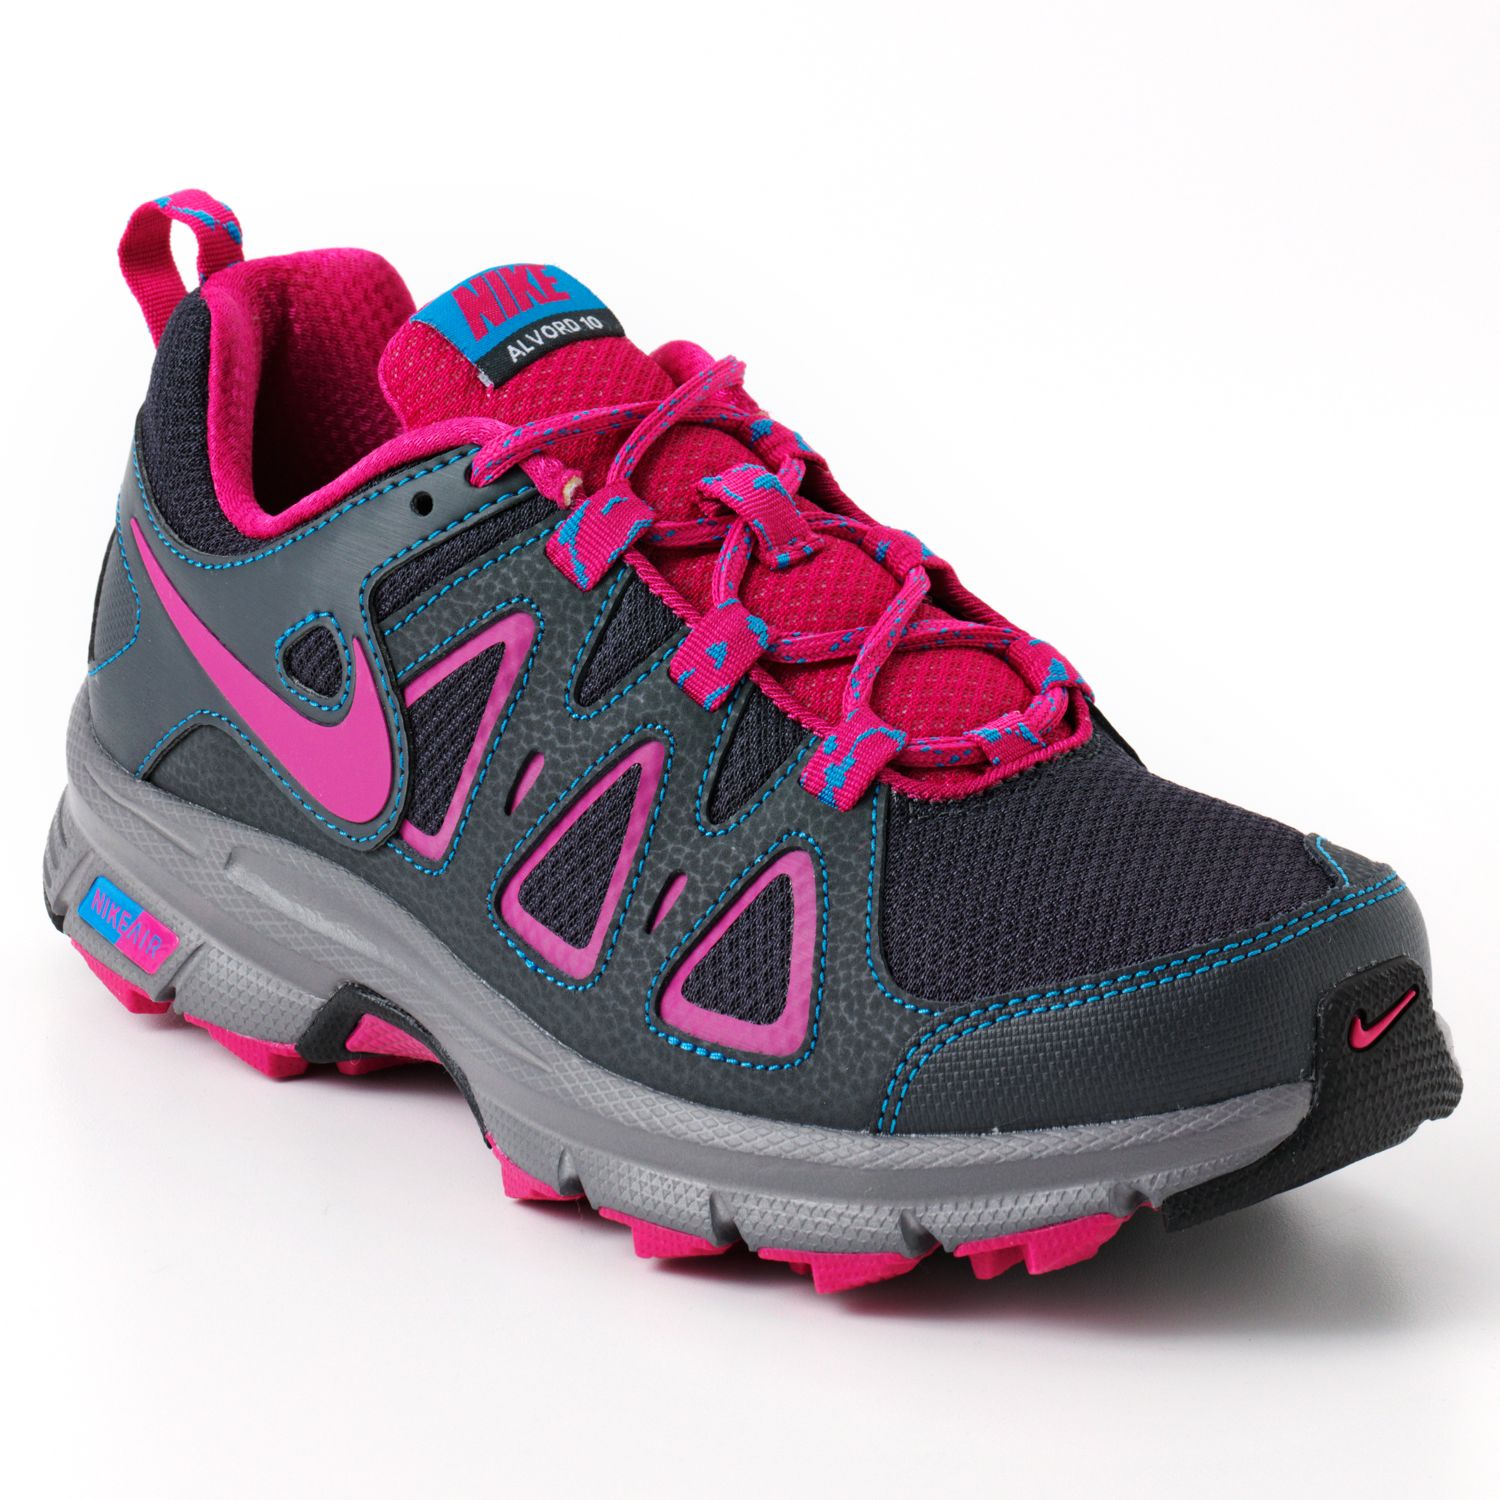 nike air alvord 10 women's trail running shoes